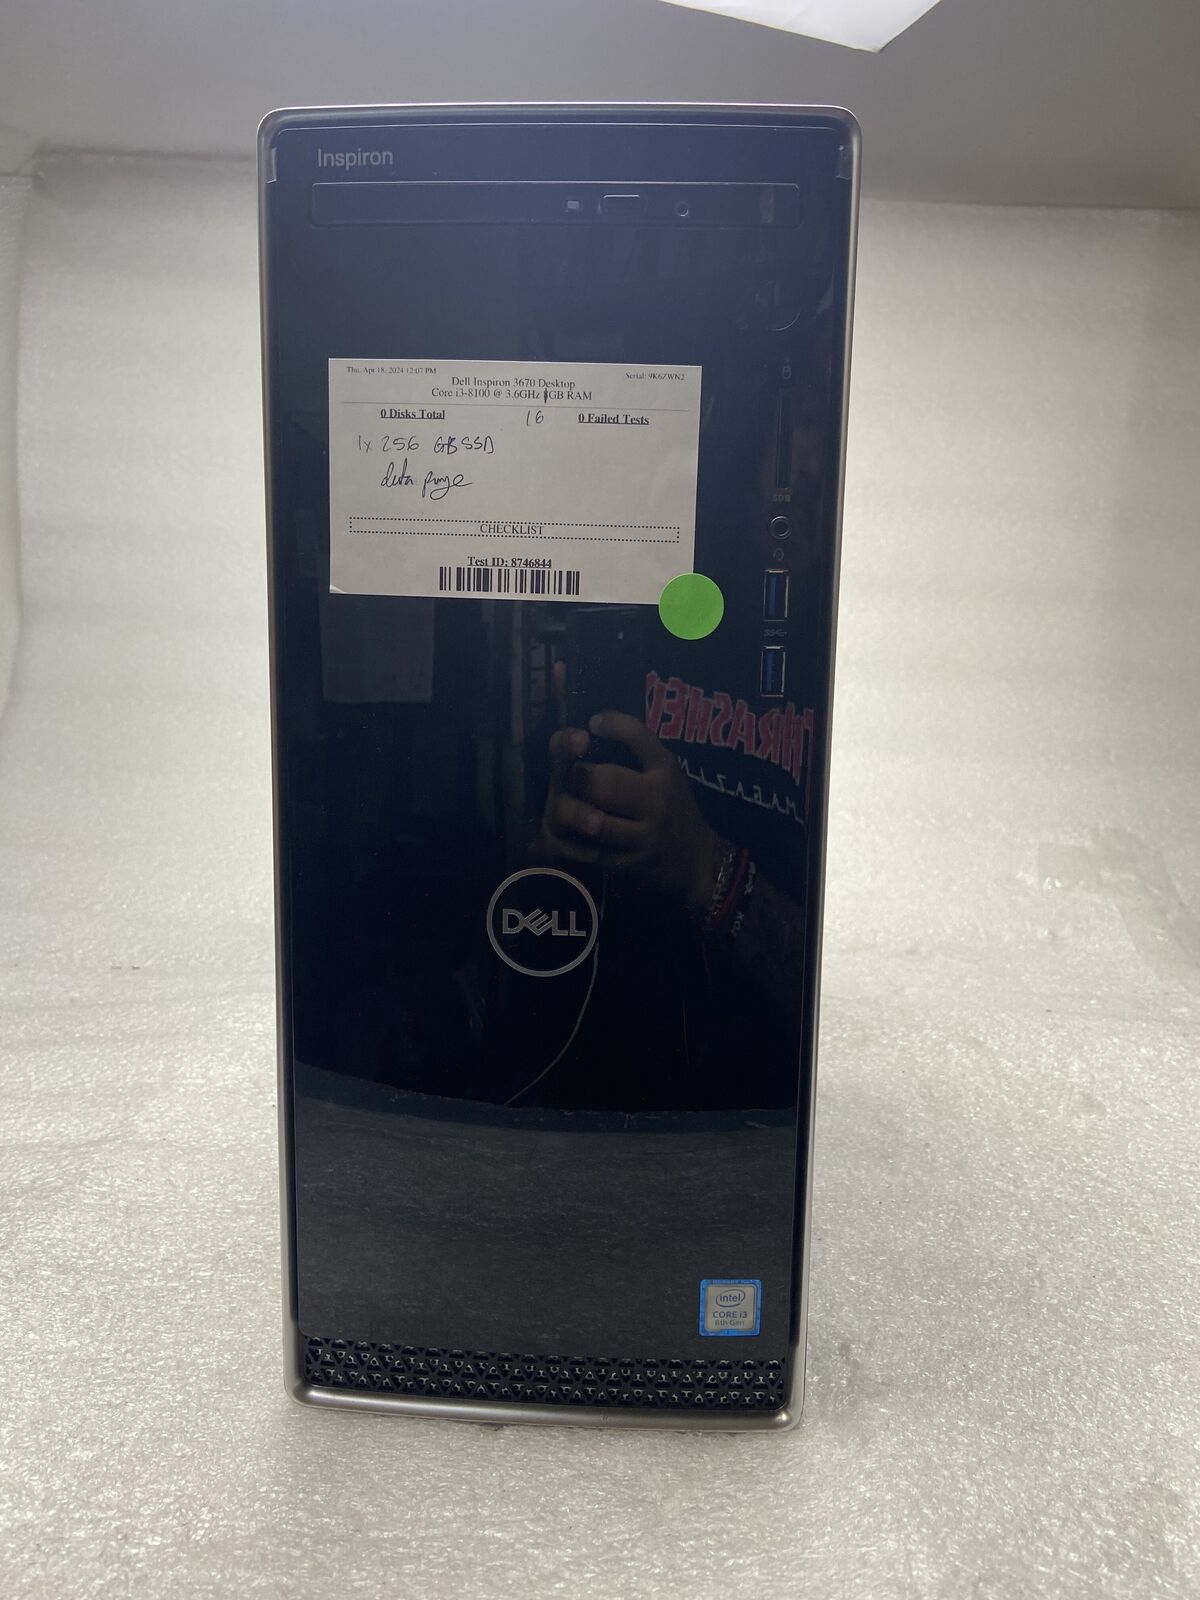 Dell Inspiron 3670 Desktop BOOTS Core i3-8100 3.60GHz 16GB RAM 256GB SSD NO OS